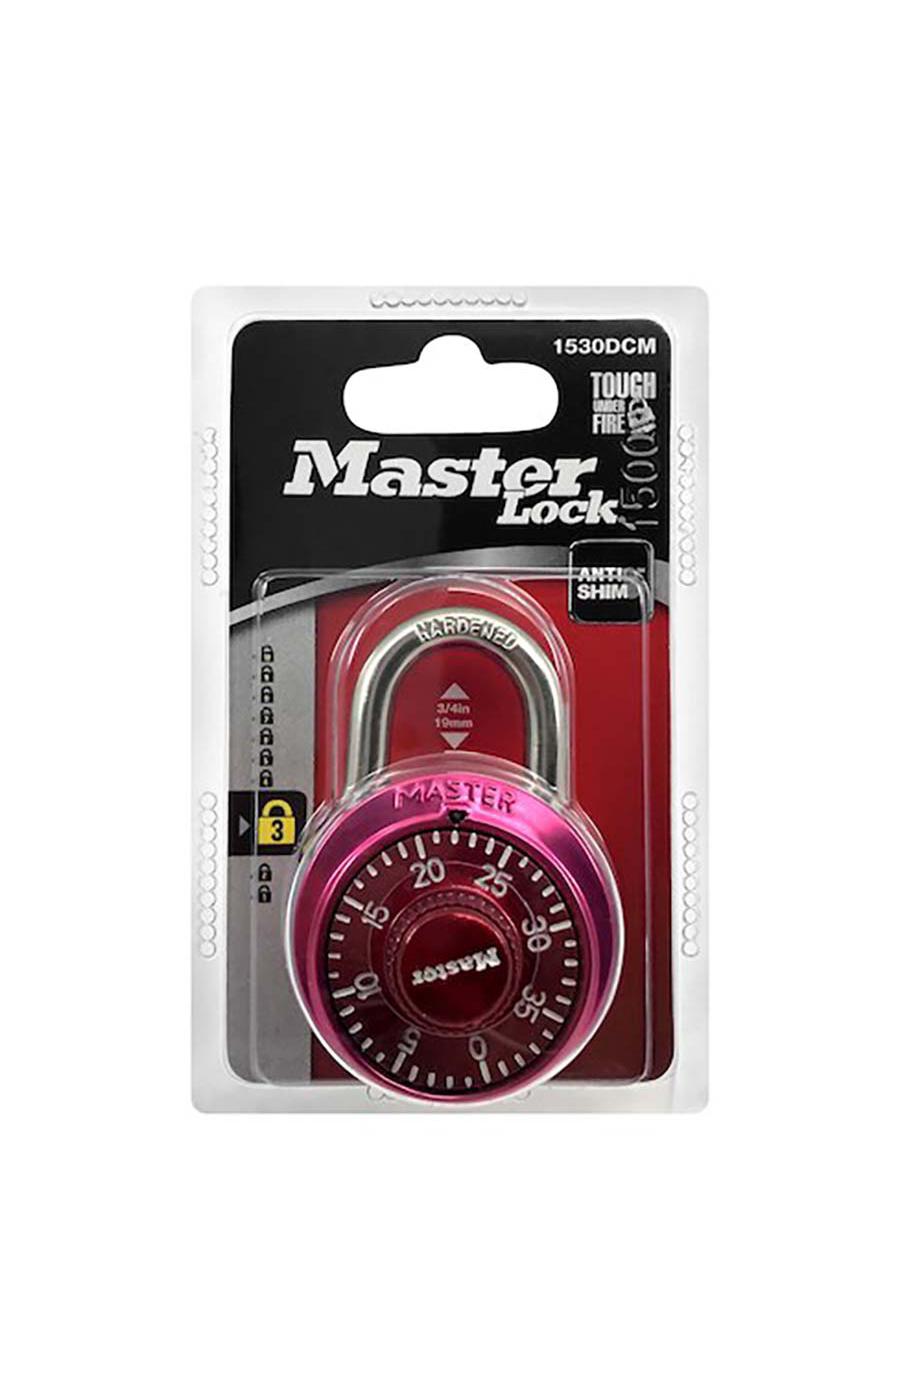 Master Lock 1530DCM Combination Lock - Assorted Colors; image 2 of 3